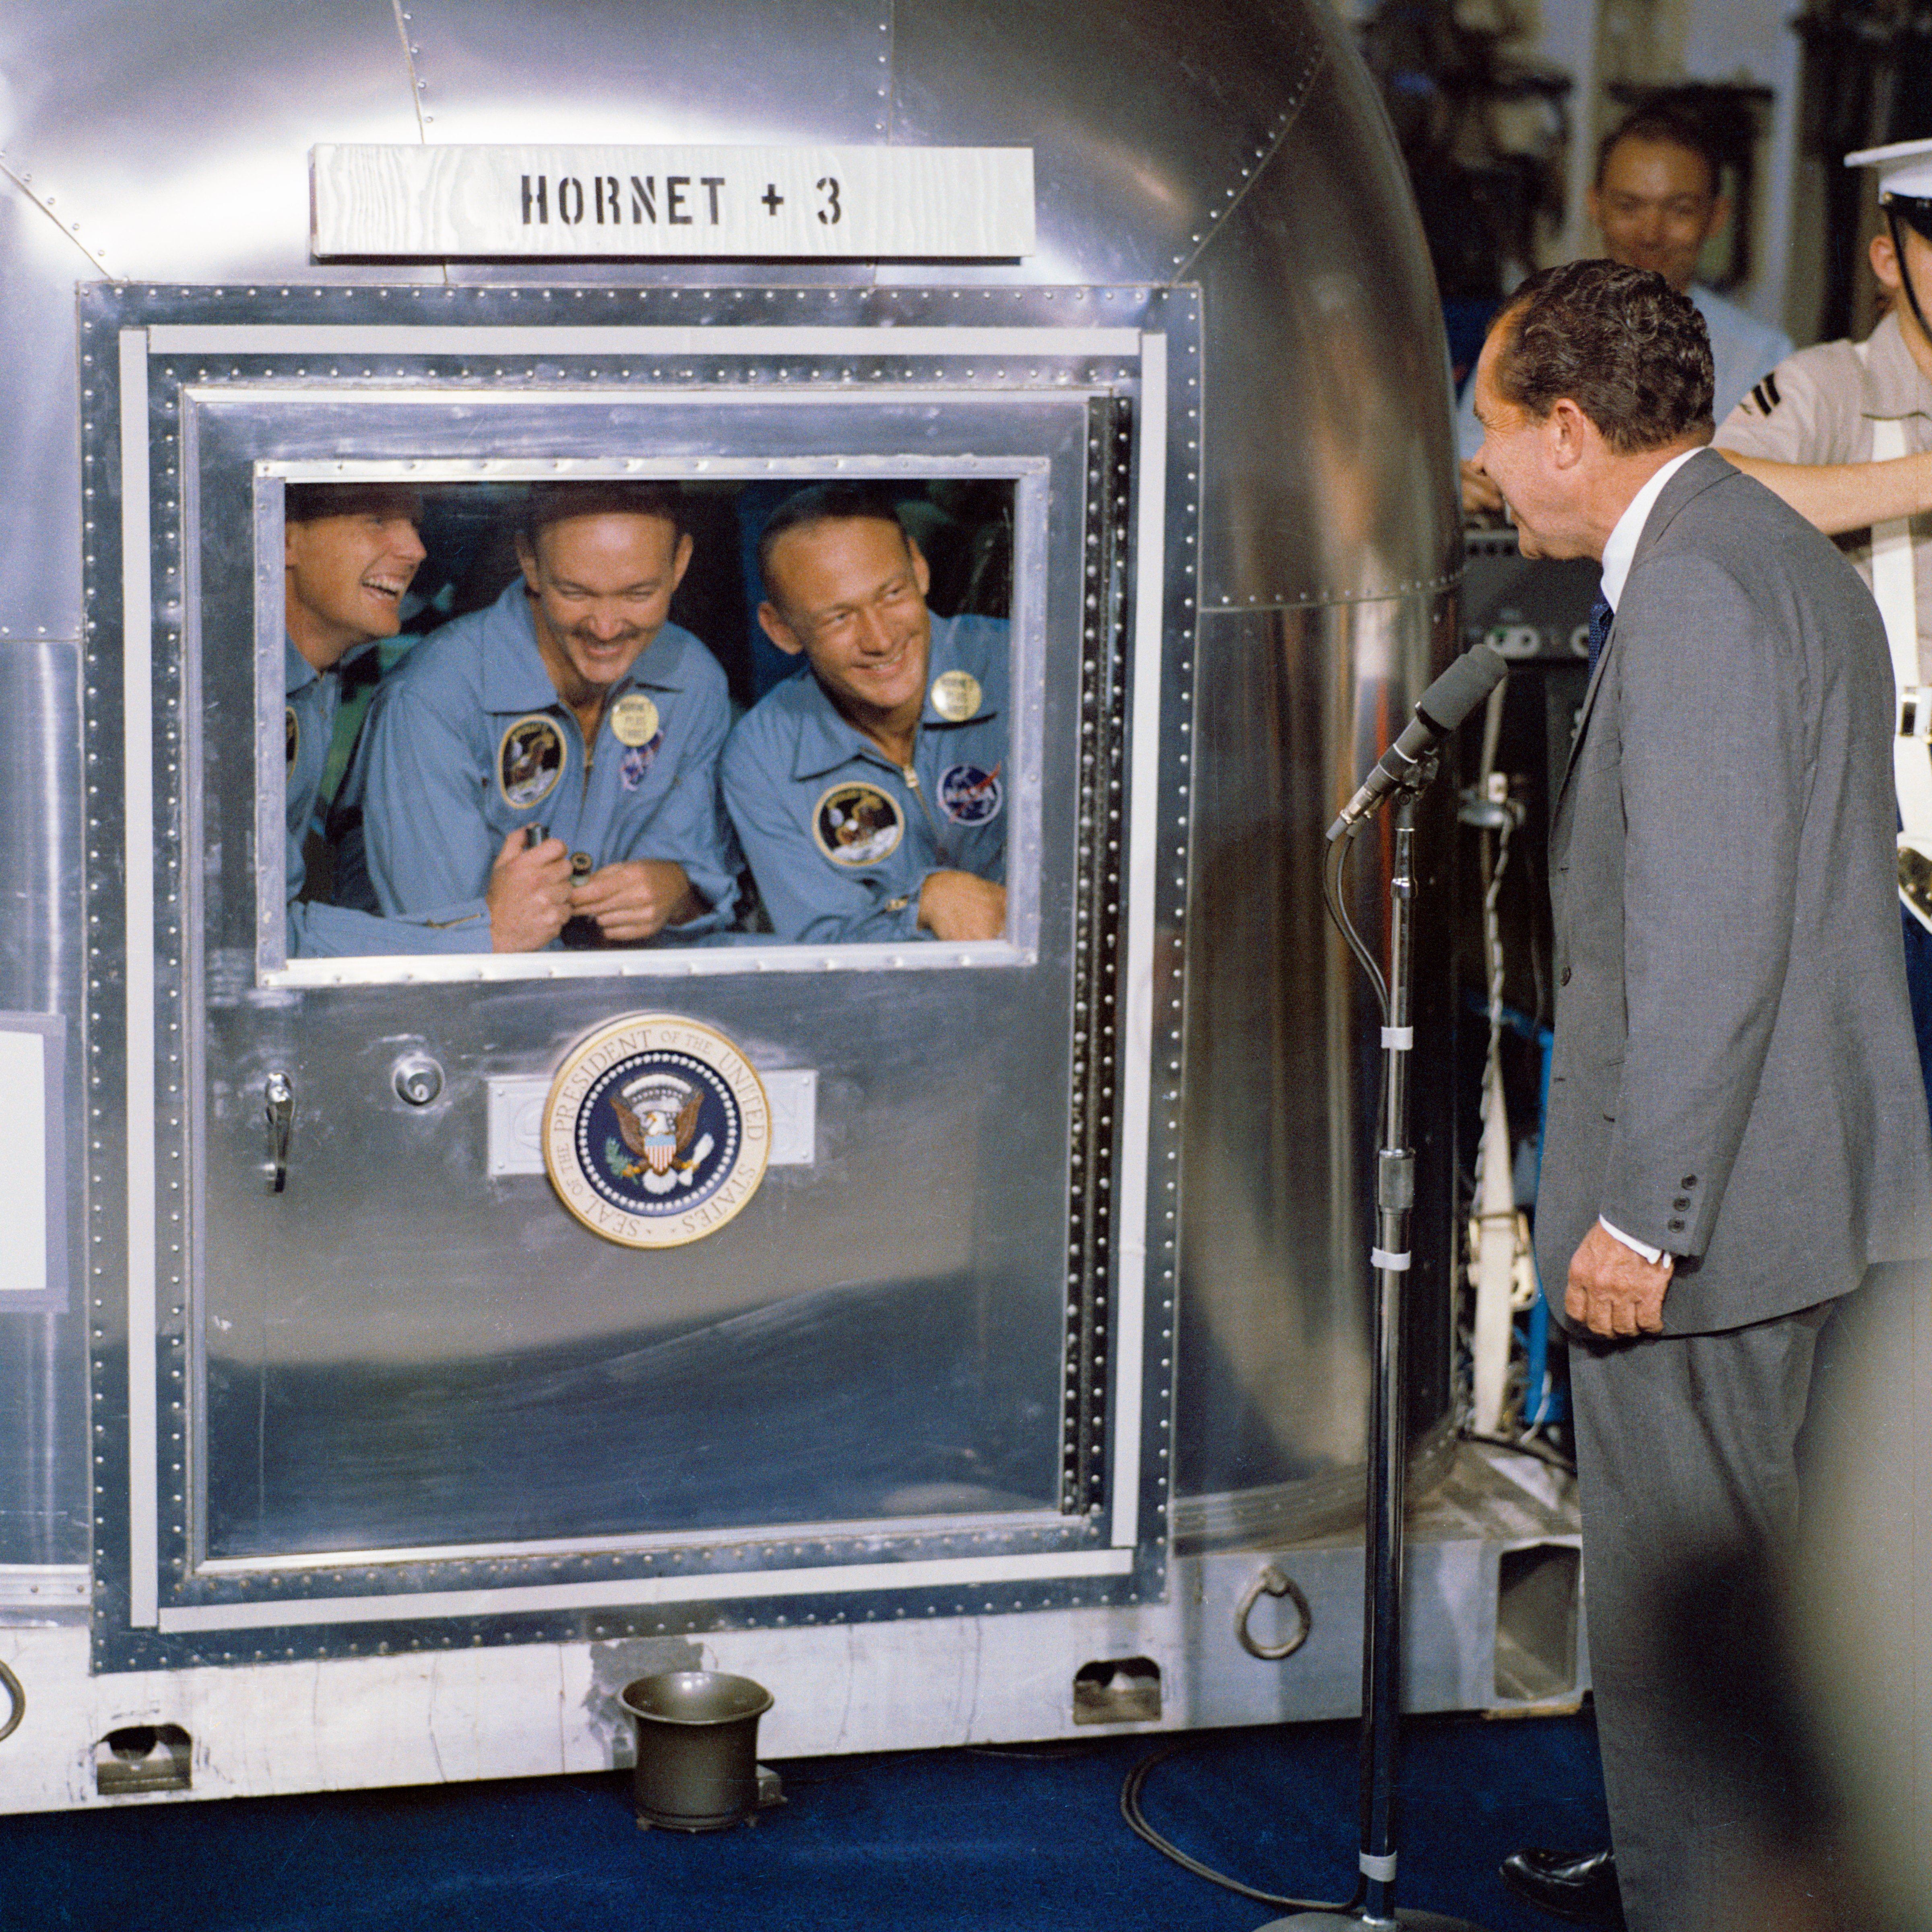 President Nixon greeted Apollo 11 astronauts Neil Armstrong, Mike Collins and Buzz Aldrin, who went immediately into medical quarantine after their return from the moon on July 24, 1969 (NASA)